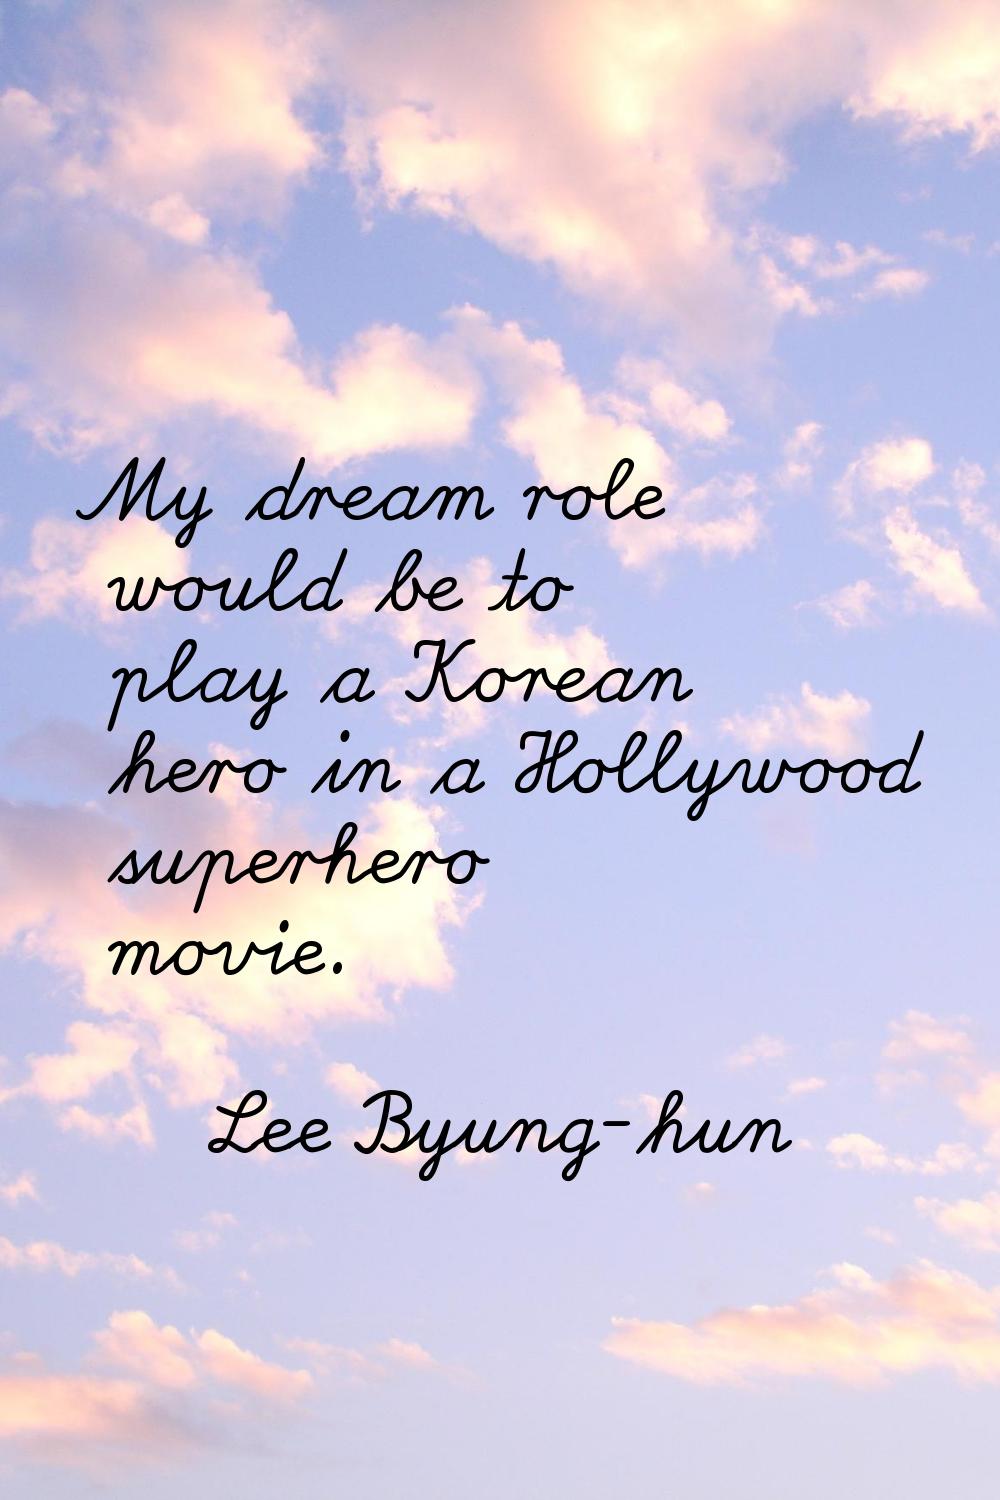 My dream role would be to play a Korean hero in a Hollywood superhero movie.